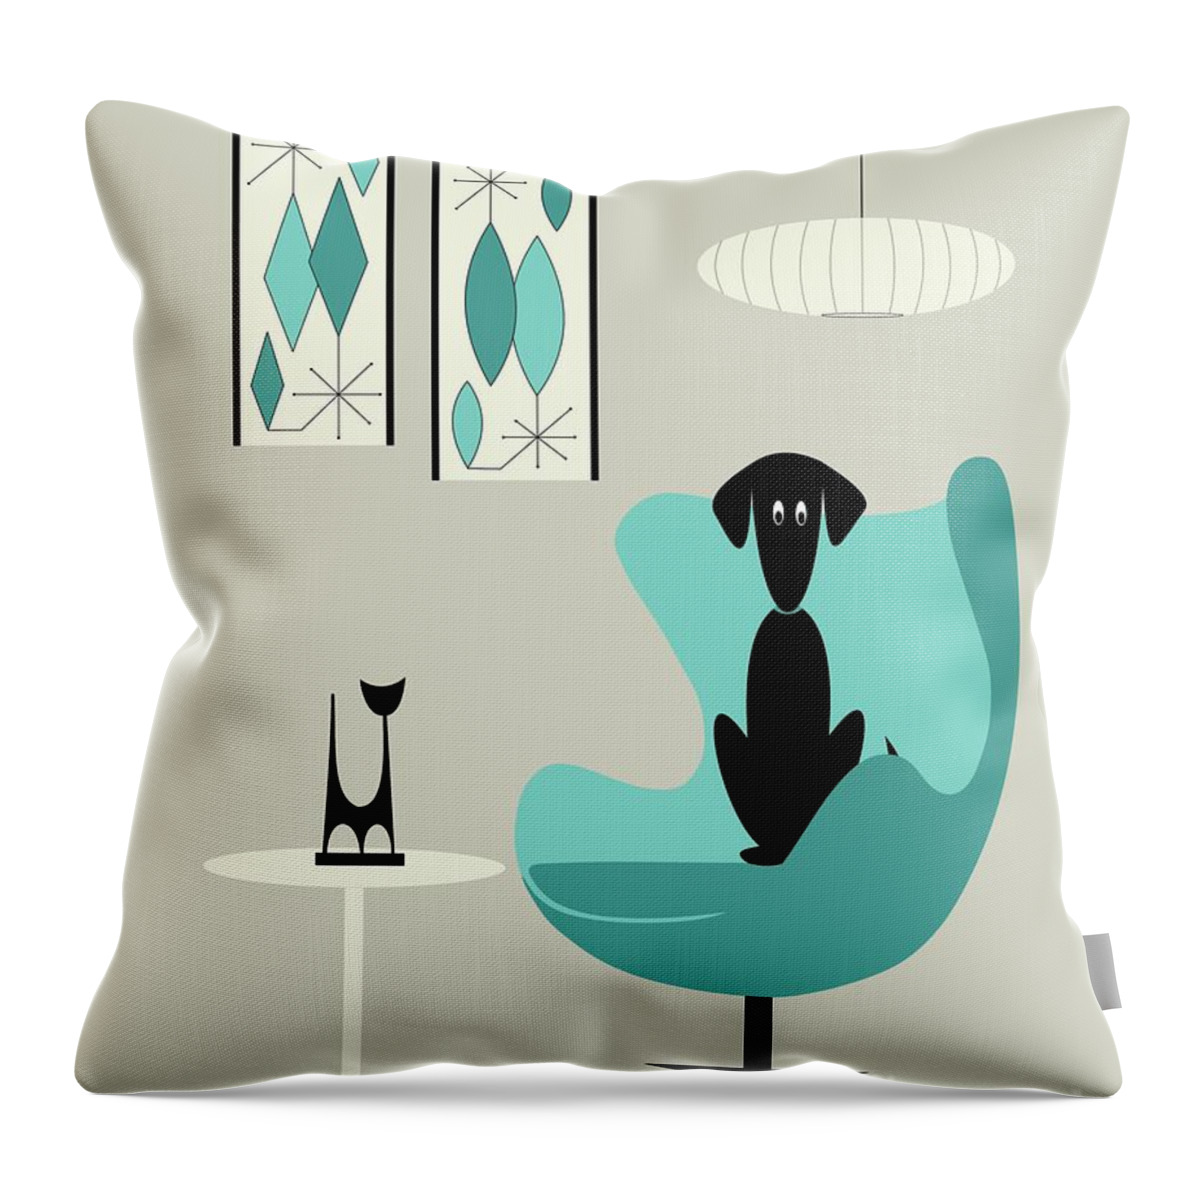 Teal Throw Pillow featuring the digital art Mini Gravel Art on Gray with Black Dog by Donna Mibus